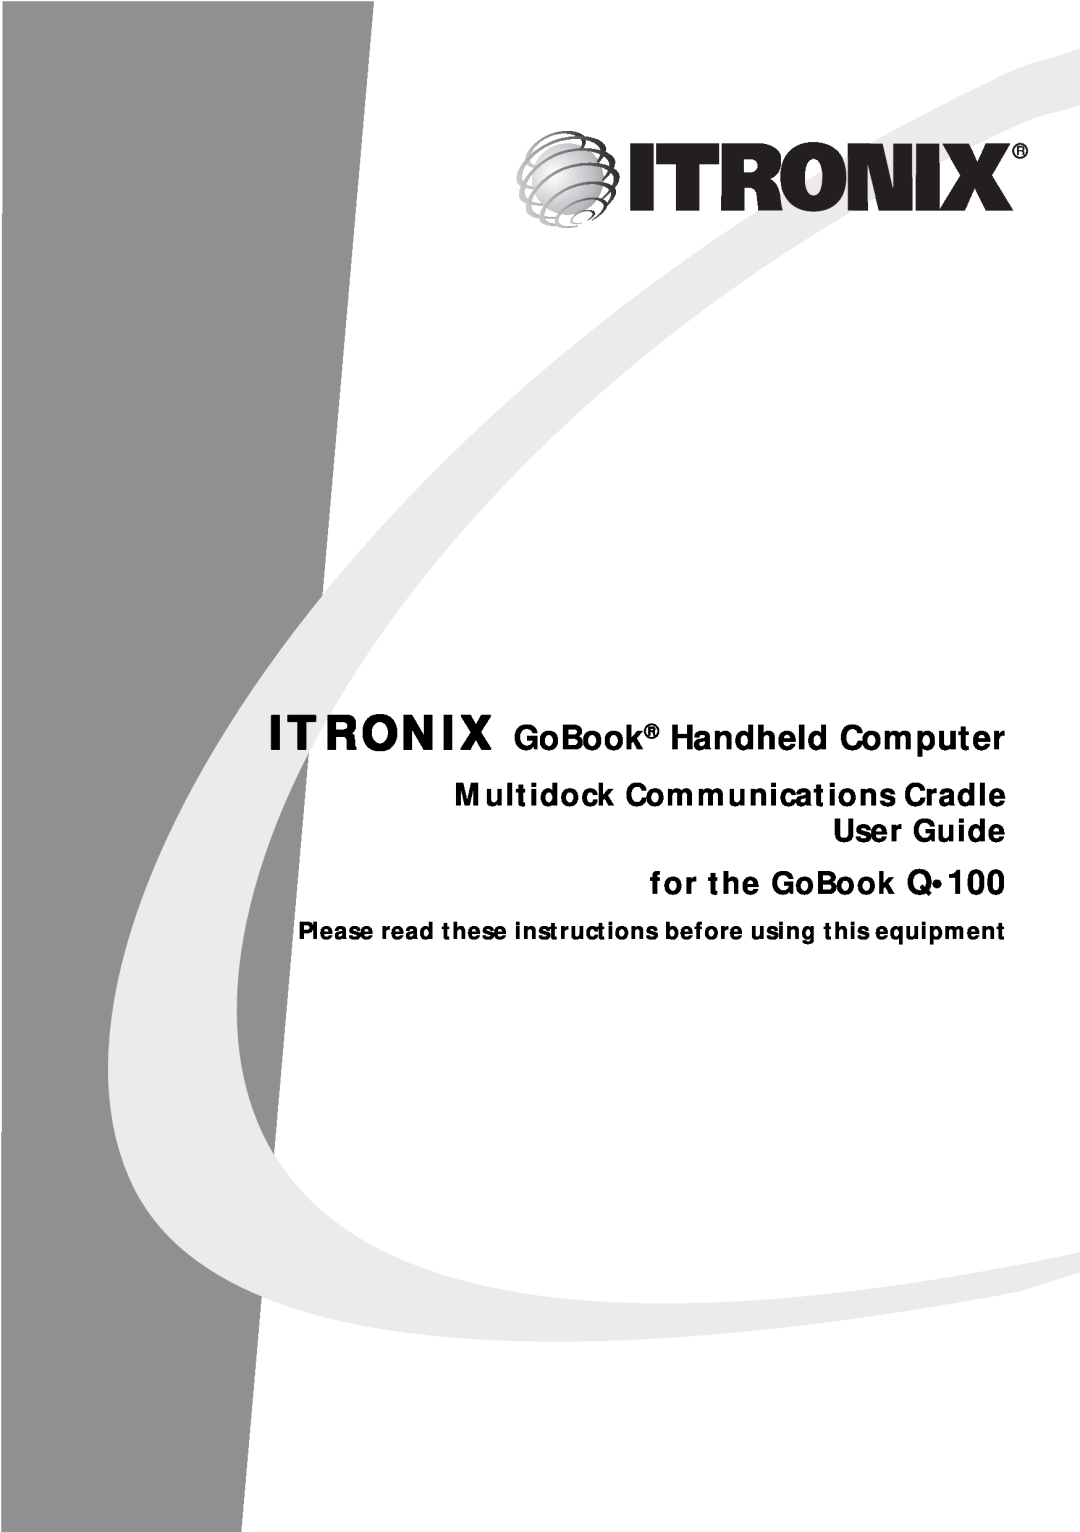 Itron Tech manual Multidock Communications Cradle User Guide for the GoBook Q100, ITRONIX GoBook Handheld Computer 